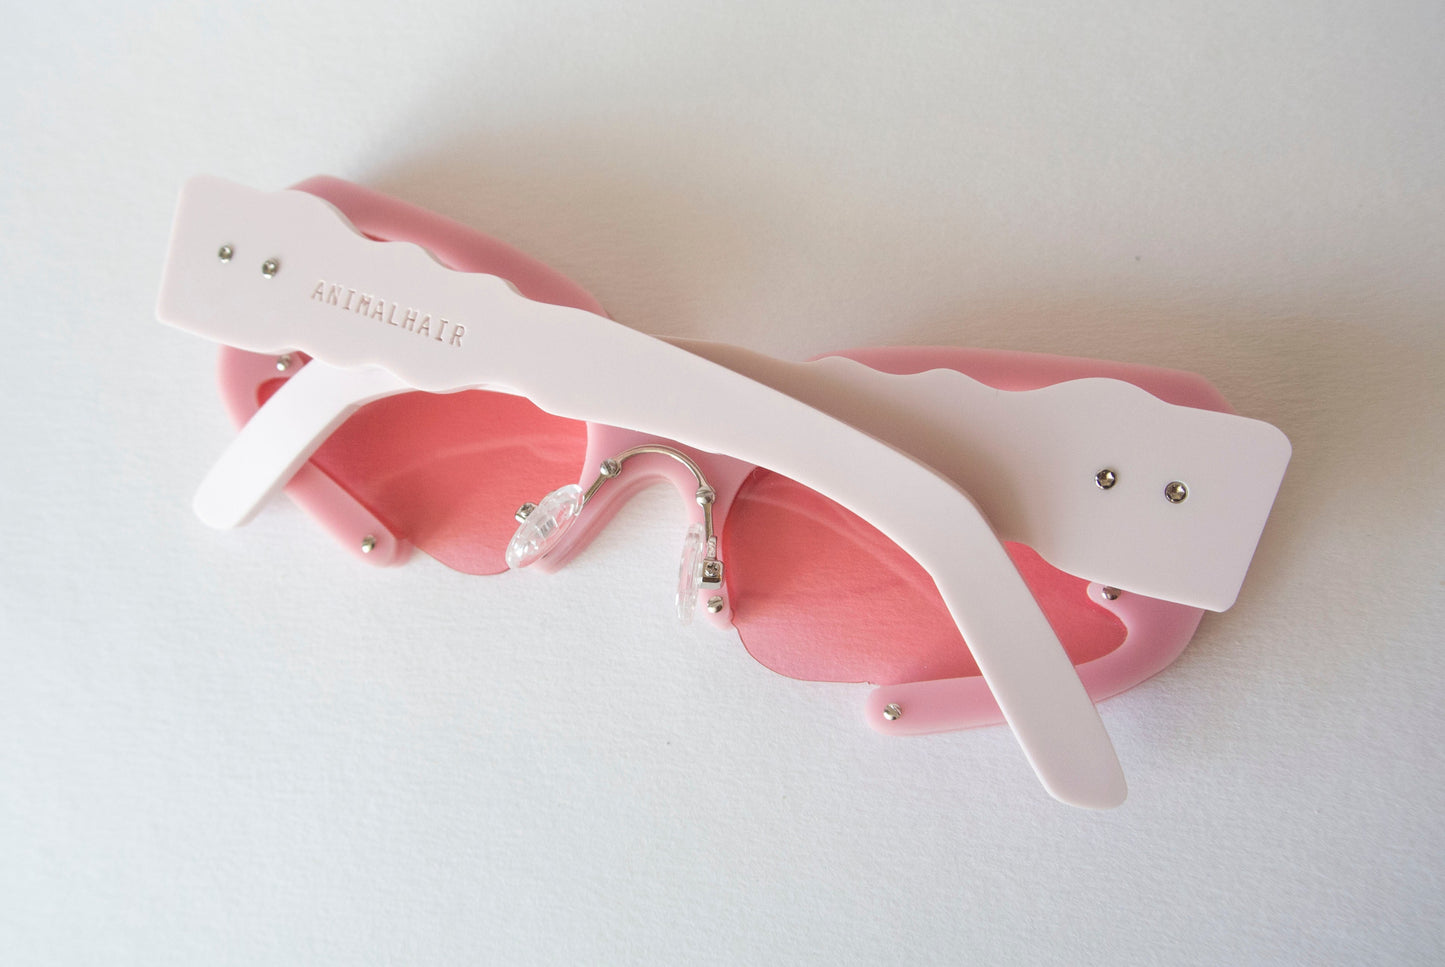 back view of pink glasses with light pink irregular shaped temples by anialhair.